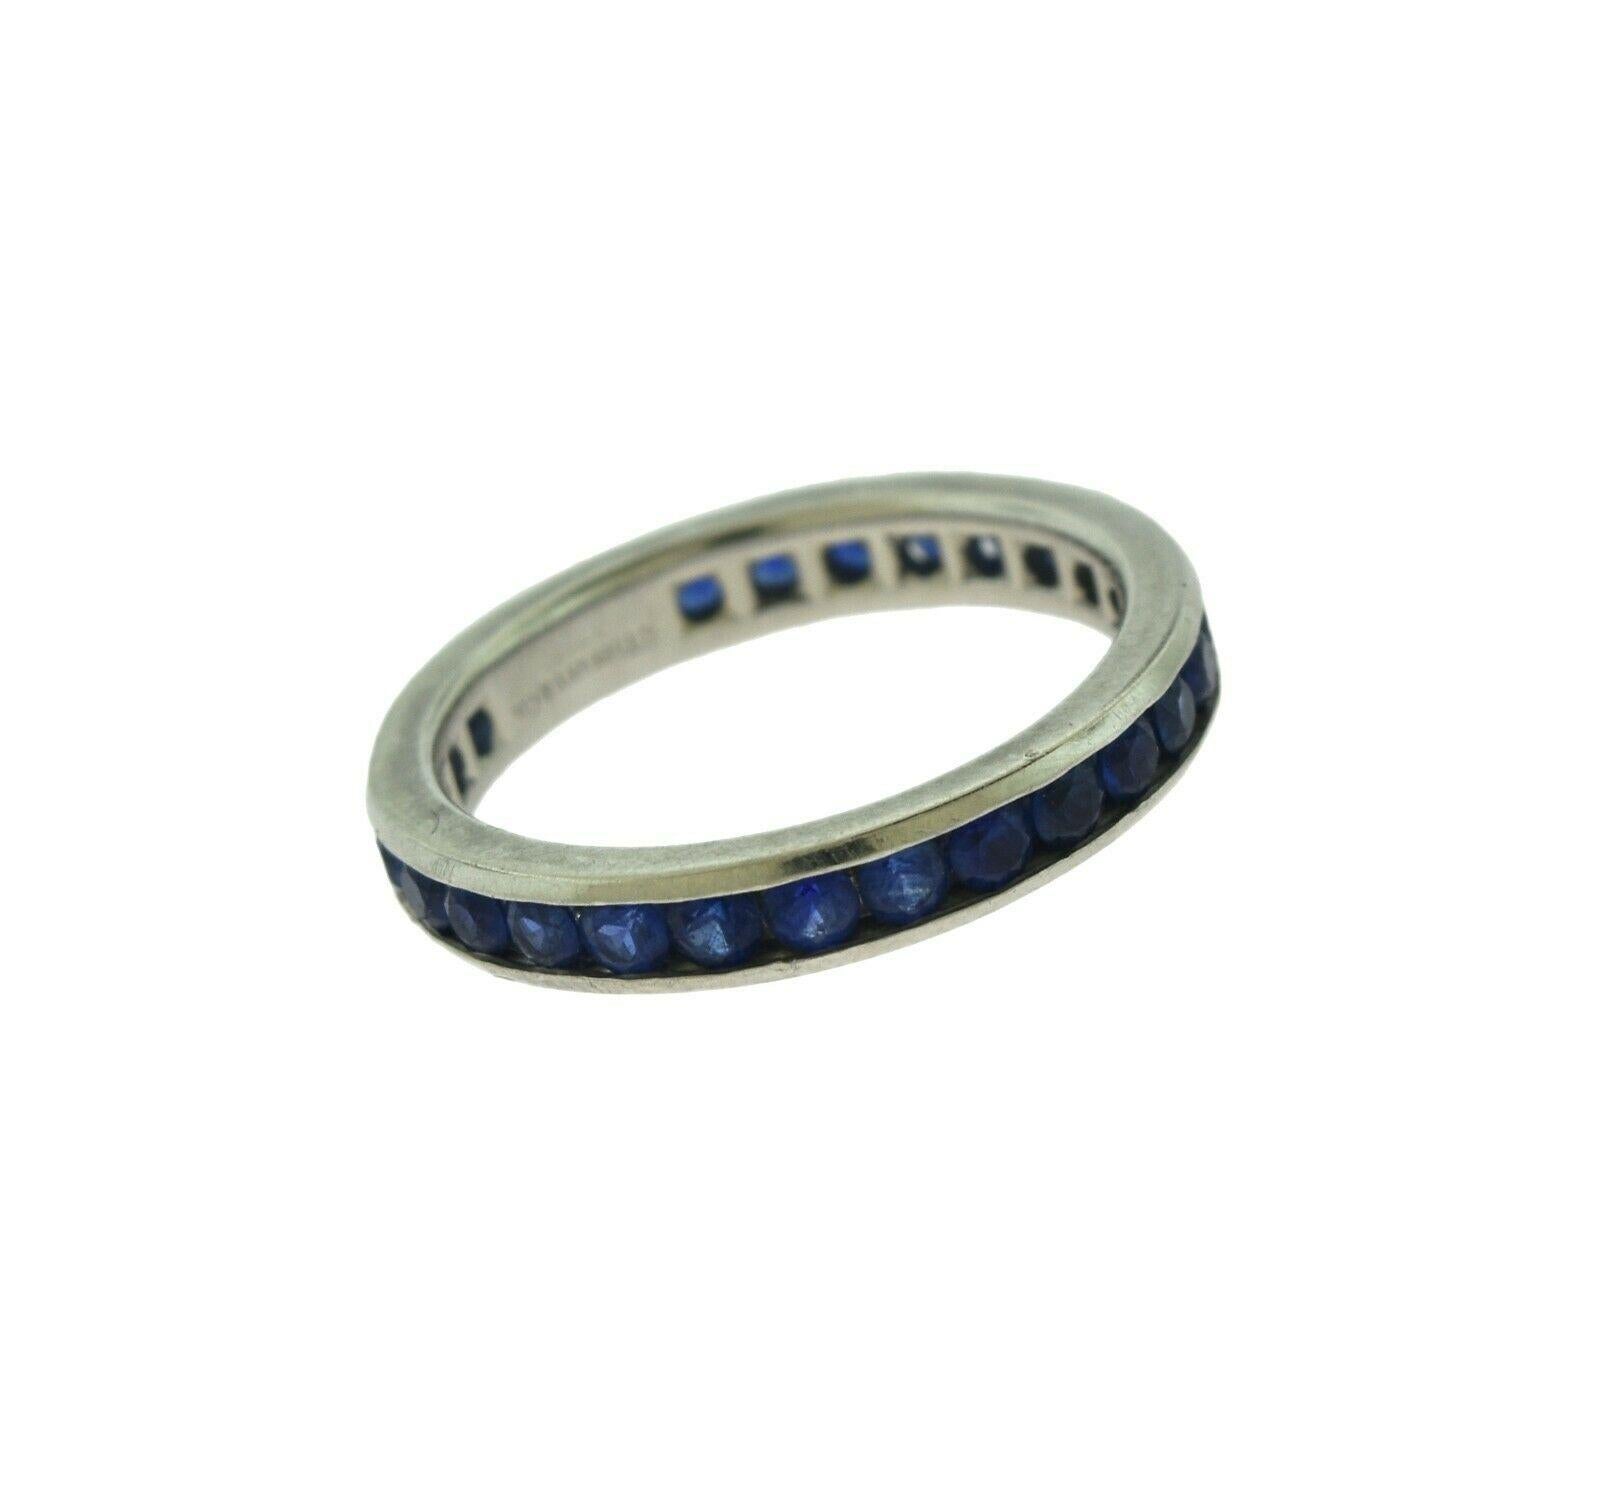 Designer: Tiffany & Co.

Style: Eternity Band

Metal: Platinum 

Metal Purity: 950 ​​

Stone:  Blue Sapphire

Ring Size: 5.5 

Band Width: 3 mm 

Total Carat  Weight :  Approx. 1.35 ct

Total Item Weight (grams):  4.75 g

Hallmarks: Tiffany & Co.;